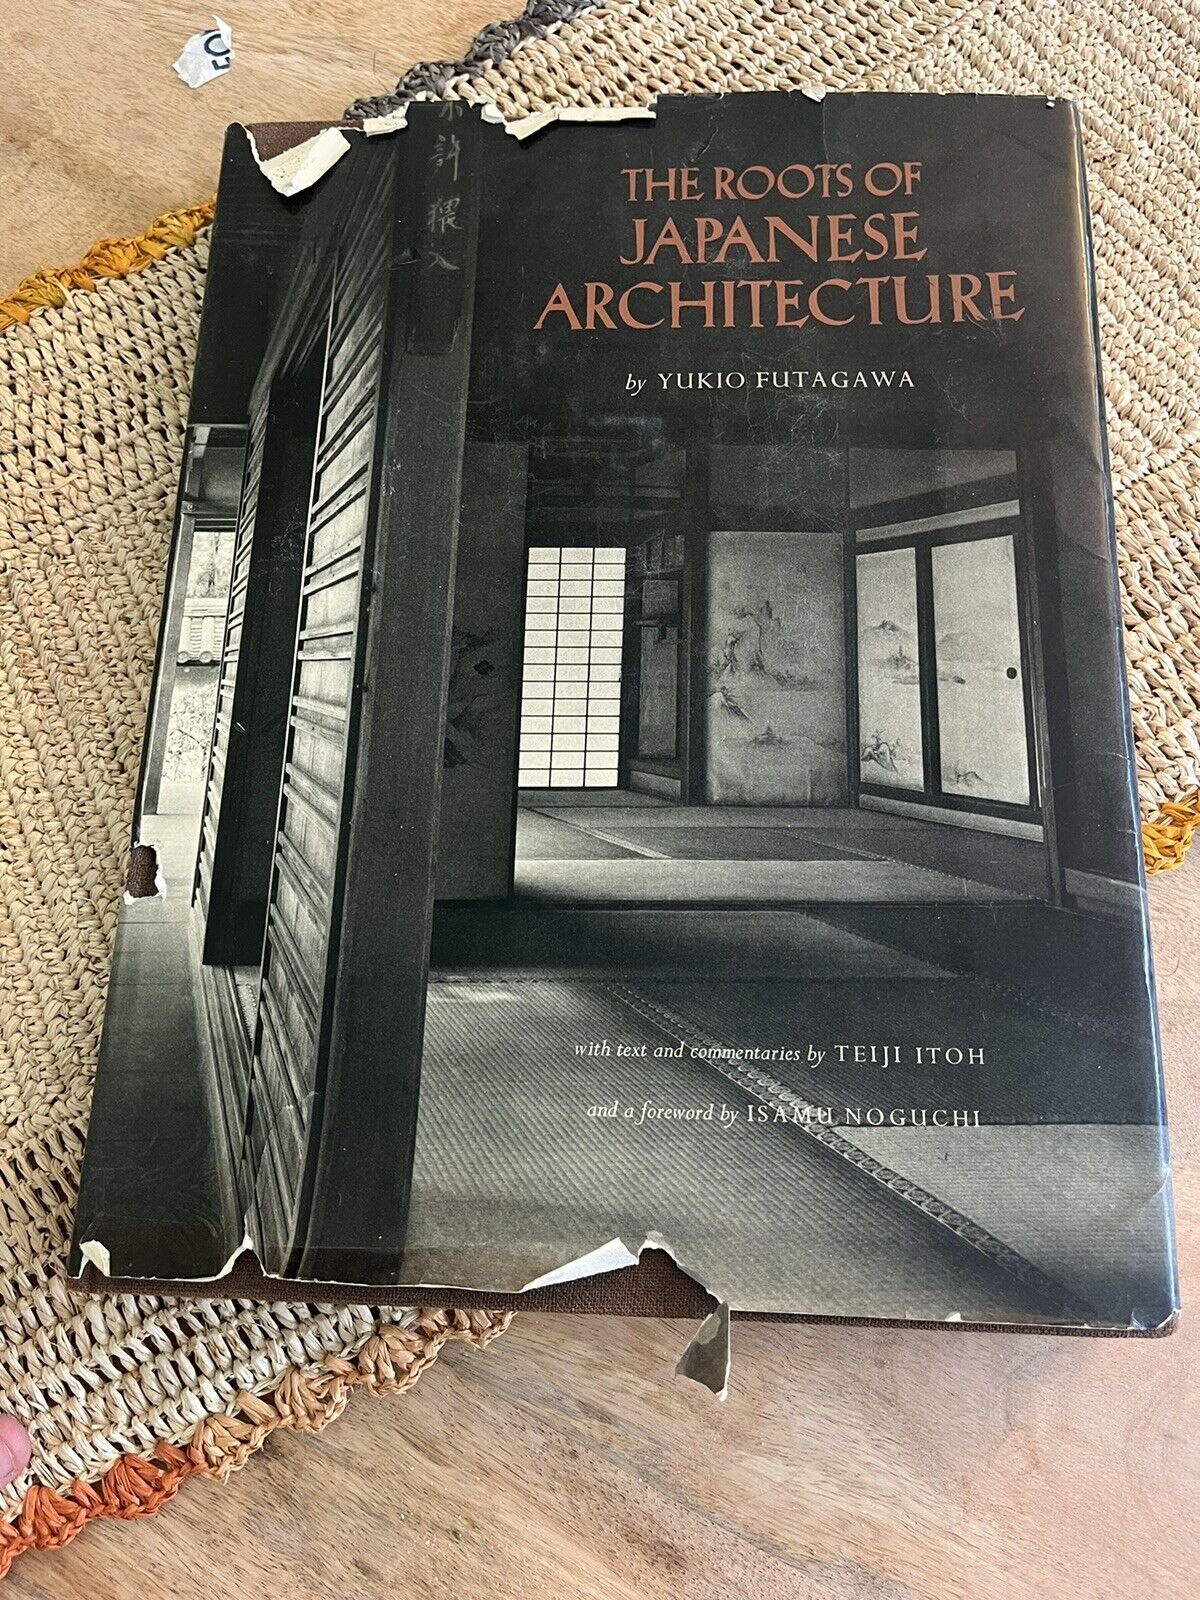 THE ROOTS OF JAPANESE ARCHITECTURE BY YUKIO FUTAGAWA HARDCOVER 1st Edition